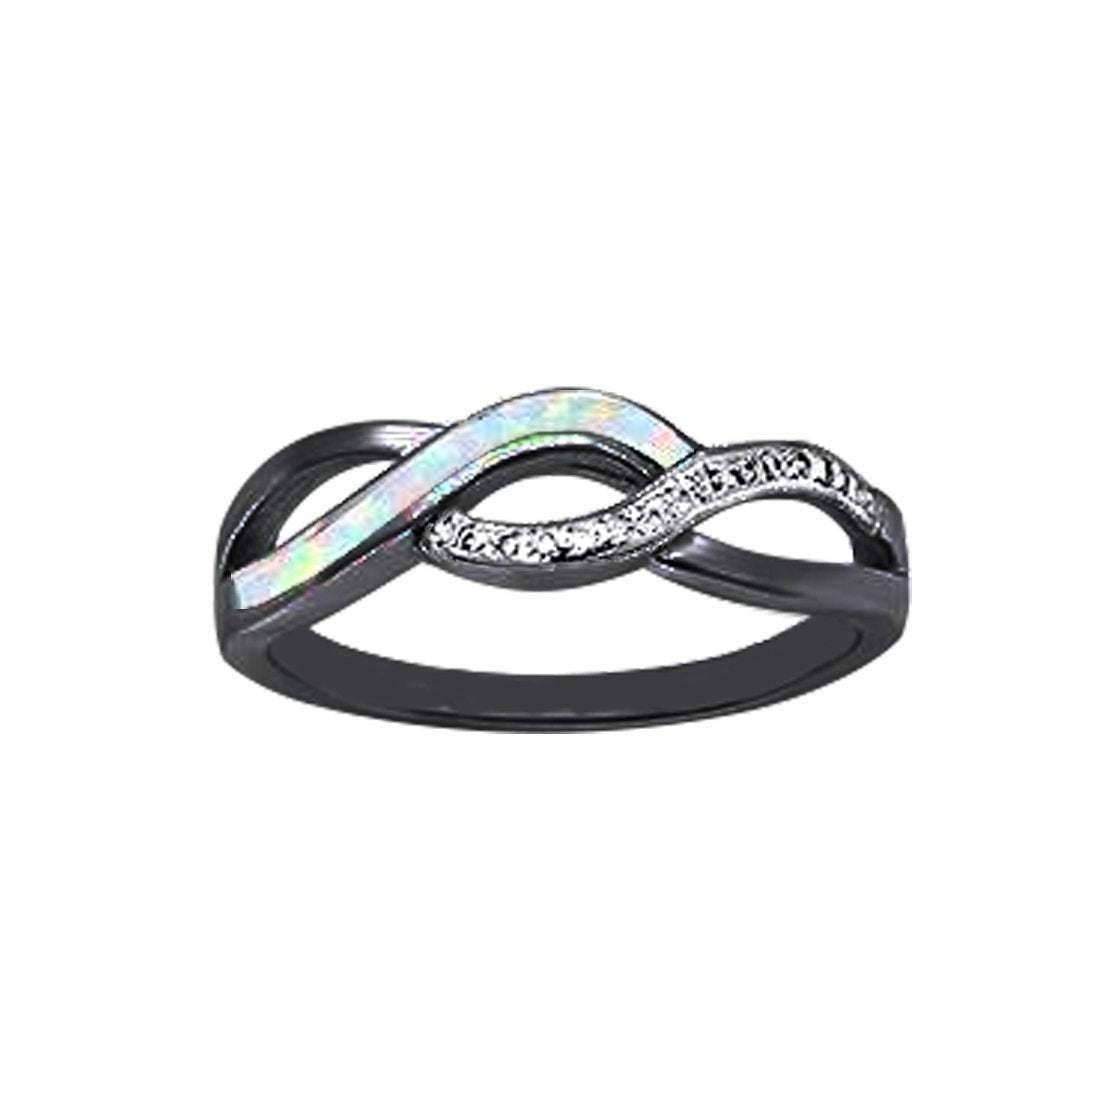 Crisscross Infinity Ring Created Opal Round Cubic Zirconia 925 Sterling Silver Choose Color